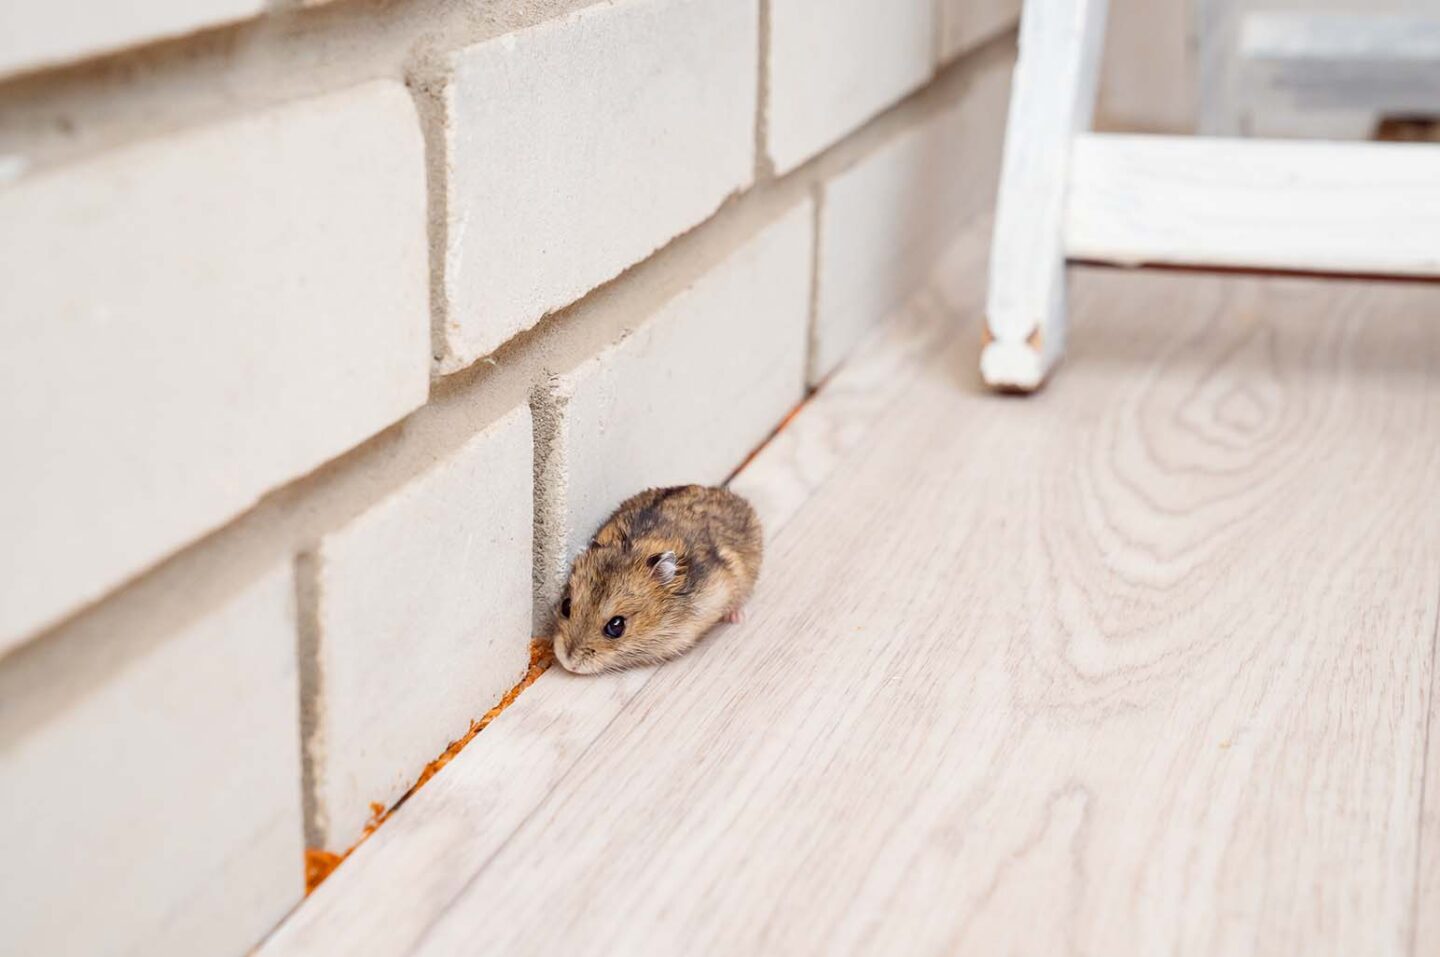 how to get rid of a rodent infestation